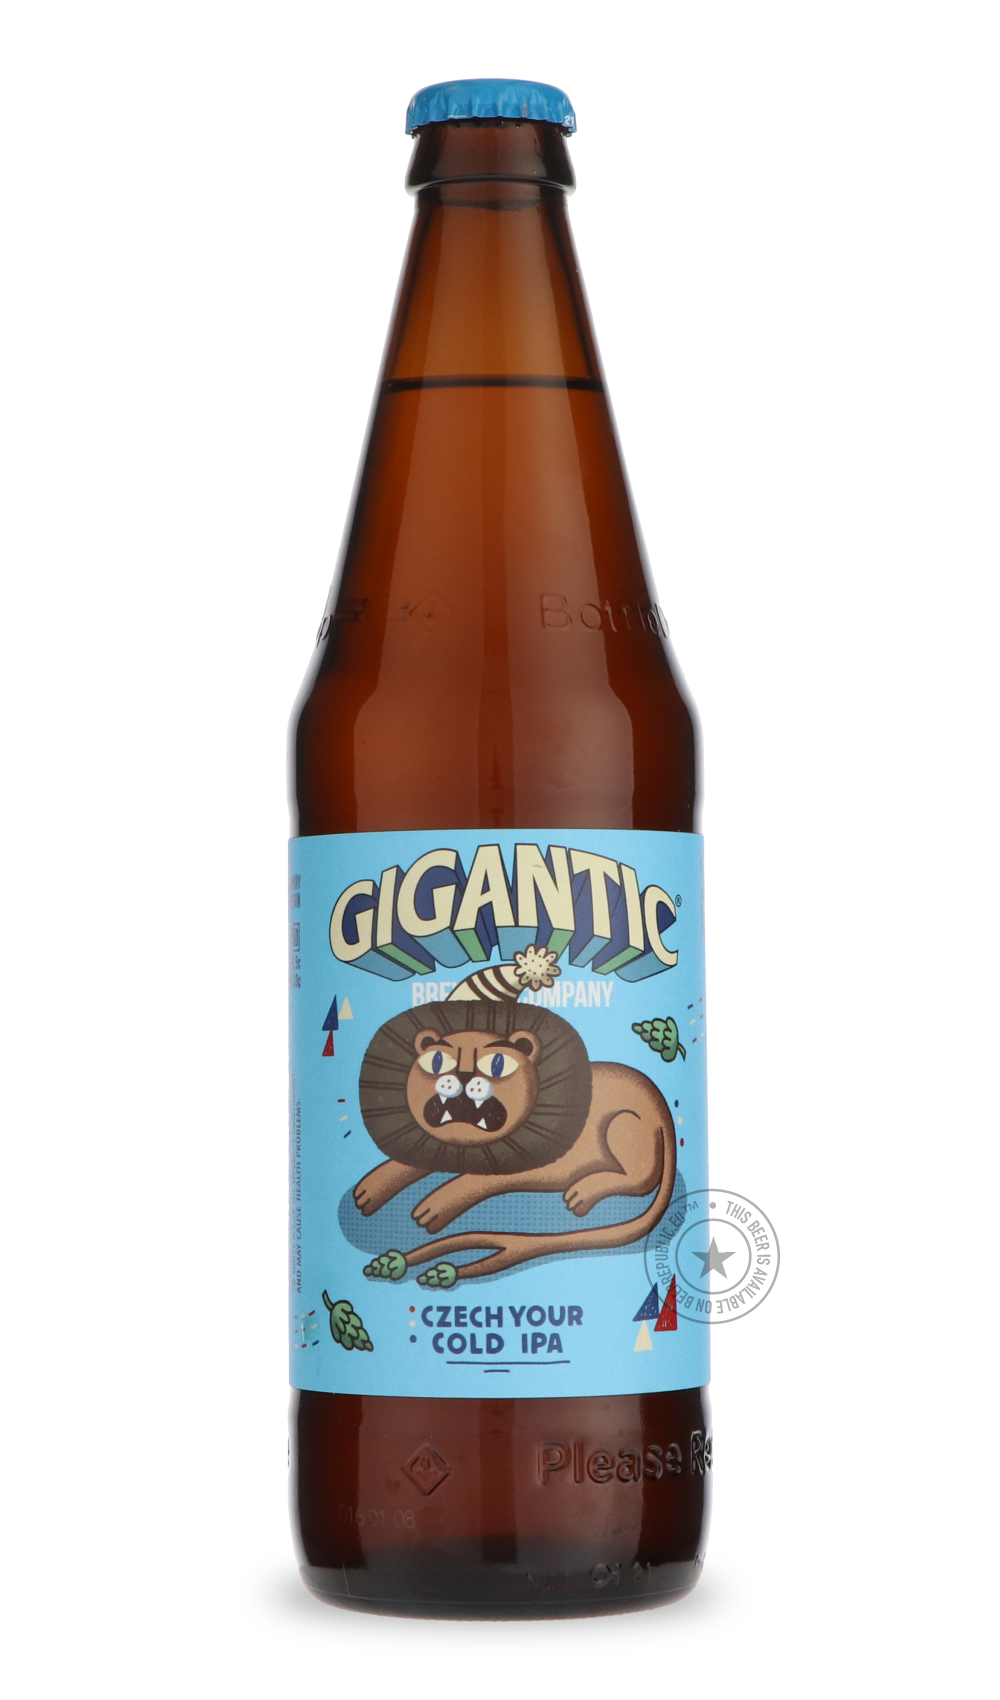 -Gigantic- Czech Your Cold IPA / Upright-IPA- Only @ Beer Republic - The best online beer store for American & Canadian craft beer - Buy beer online from the USA and Canada - Bier online kopen - Amerikaans bier kopen - Craft beer store - Craft beer kopen - Amerikanisch bier kaufen - Bier online kaufen - Acheter biere online - IPA - Stout - Porter - New England IPA - Hazy IPA - Imperial Stout - Barrel Aged - Barrel Aged Imperial Stout - Brown - Dark beer - Blond - Blonde - Pilsner - Lager - Wheat - Weizen - 